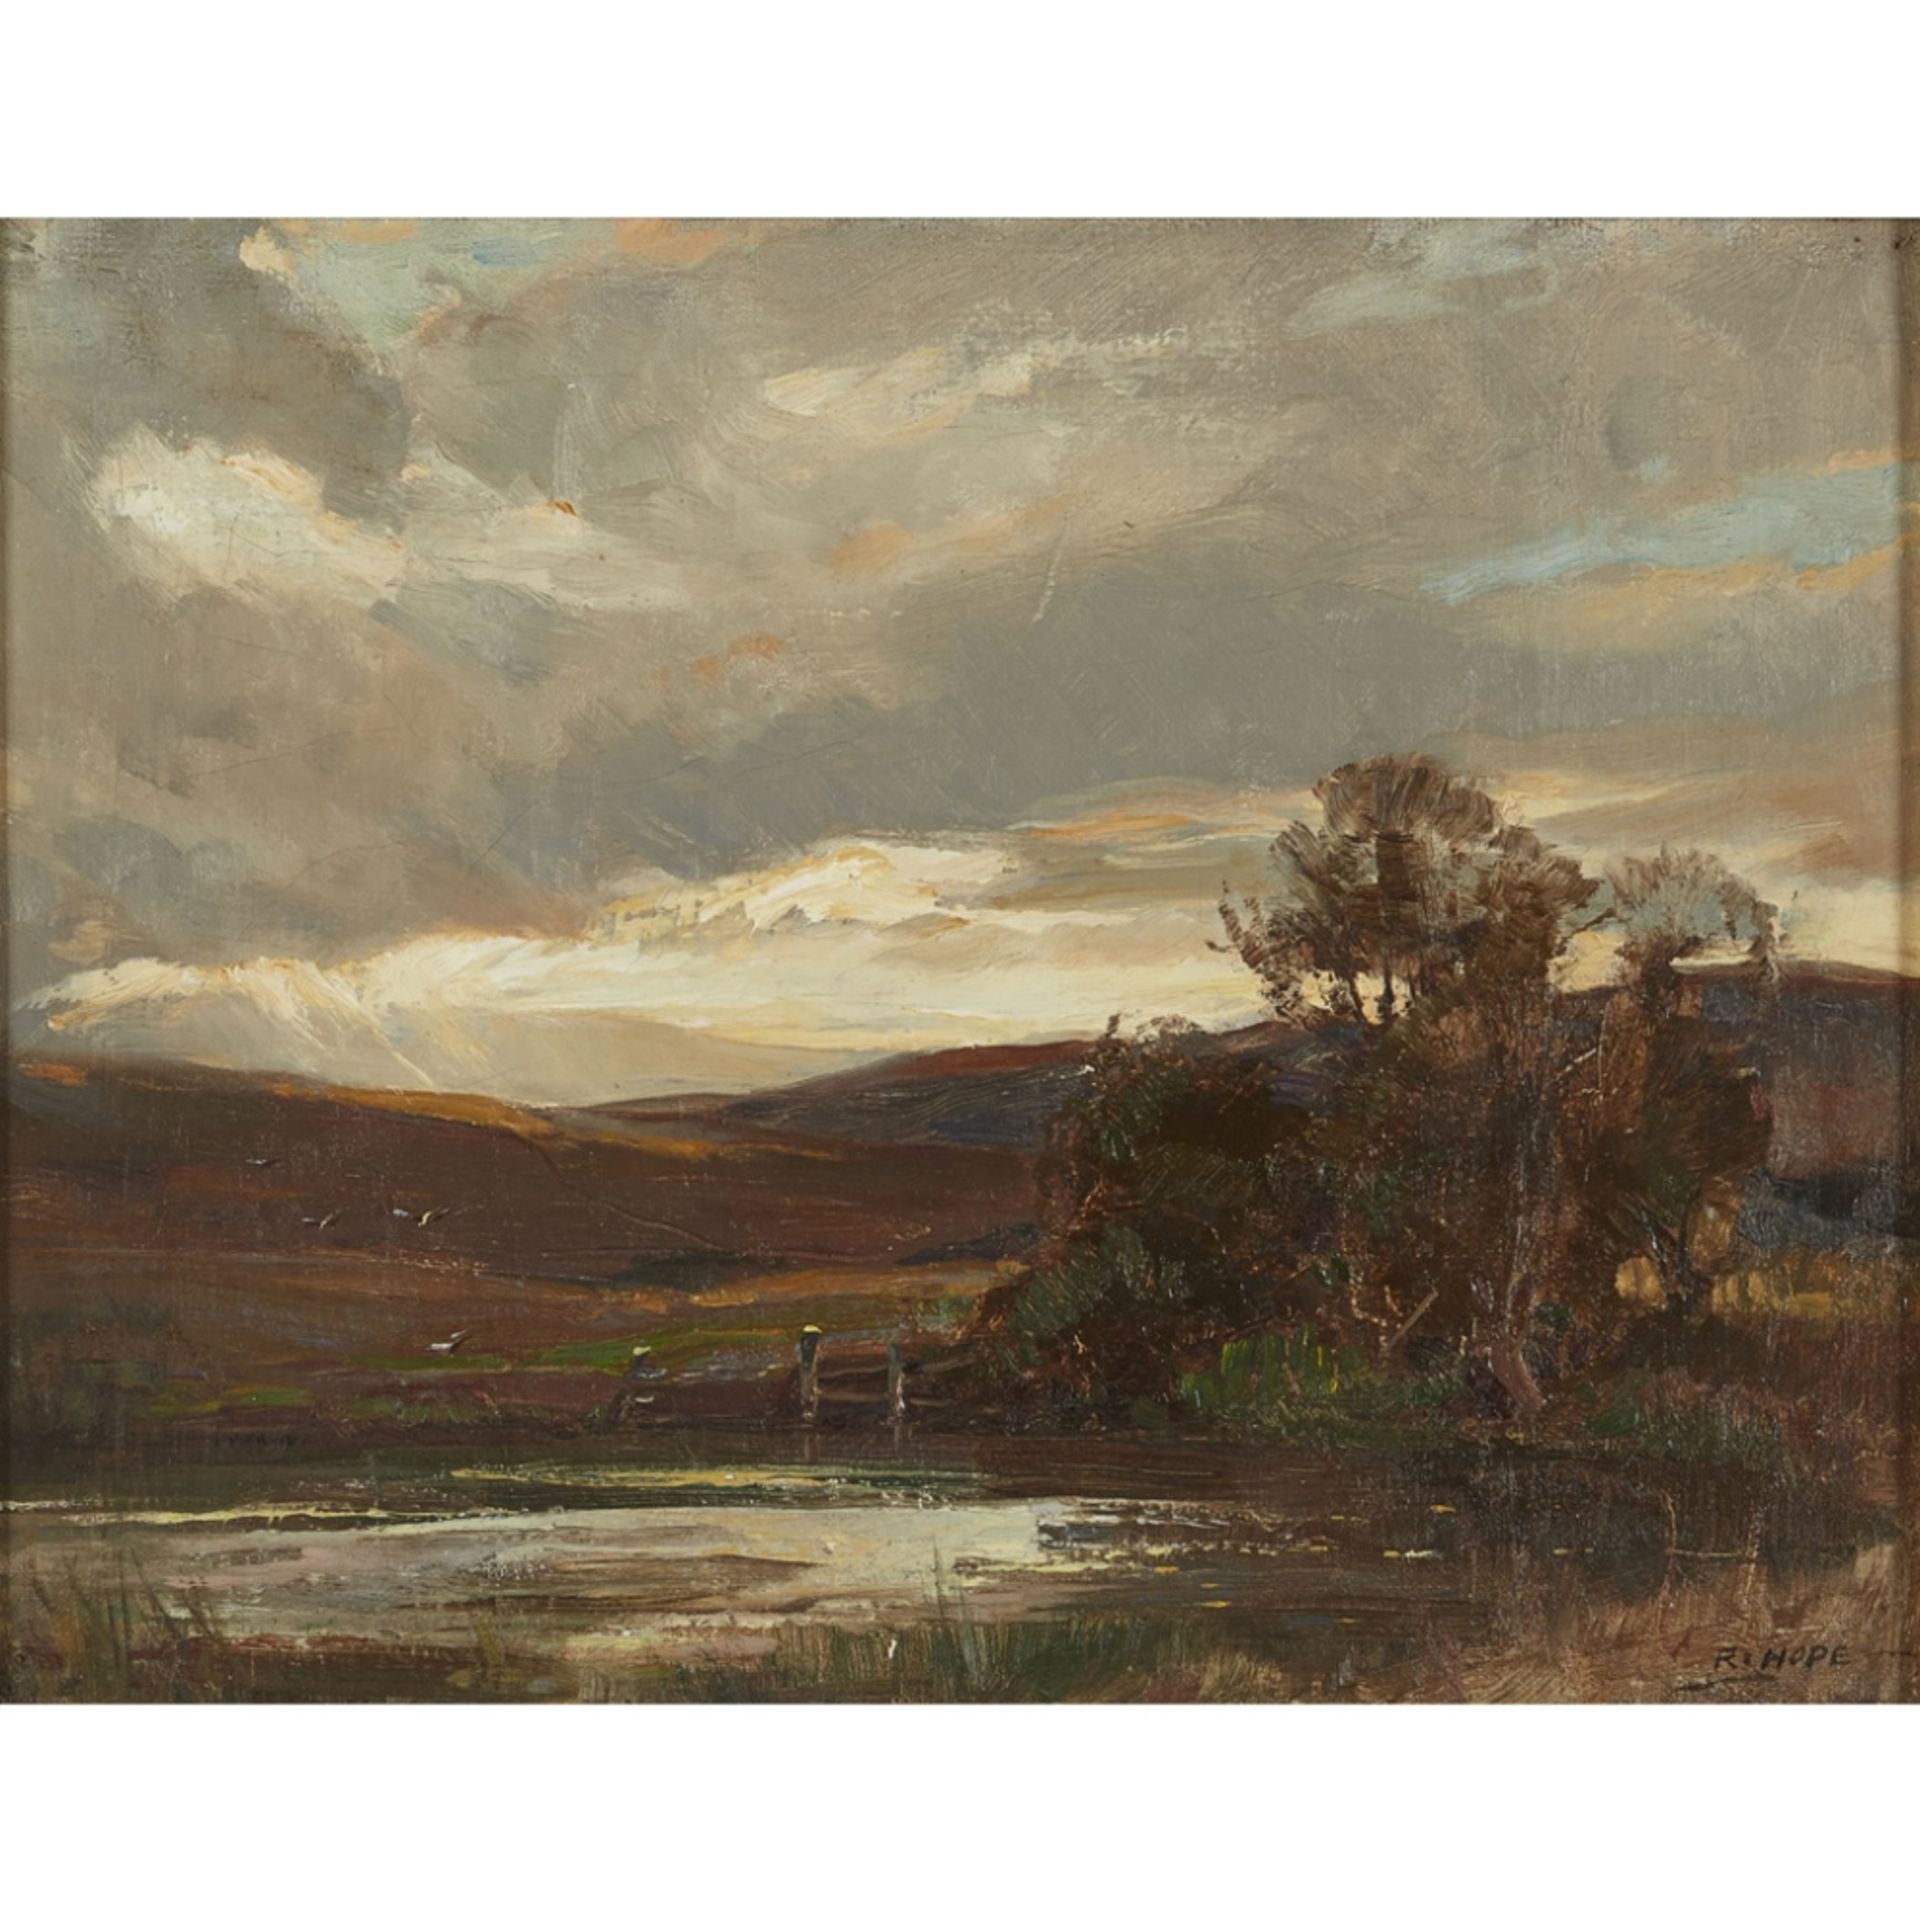 ROBERT HOPE R.S.A (SCOTTISH 1869-1936)EVENING ON THE SWIRE ROAD, ETTRICK BRIDGE Signed, oil on